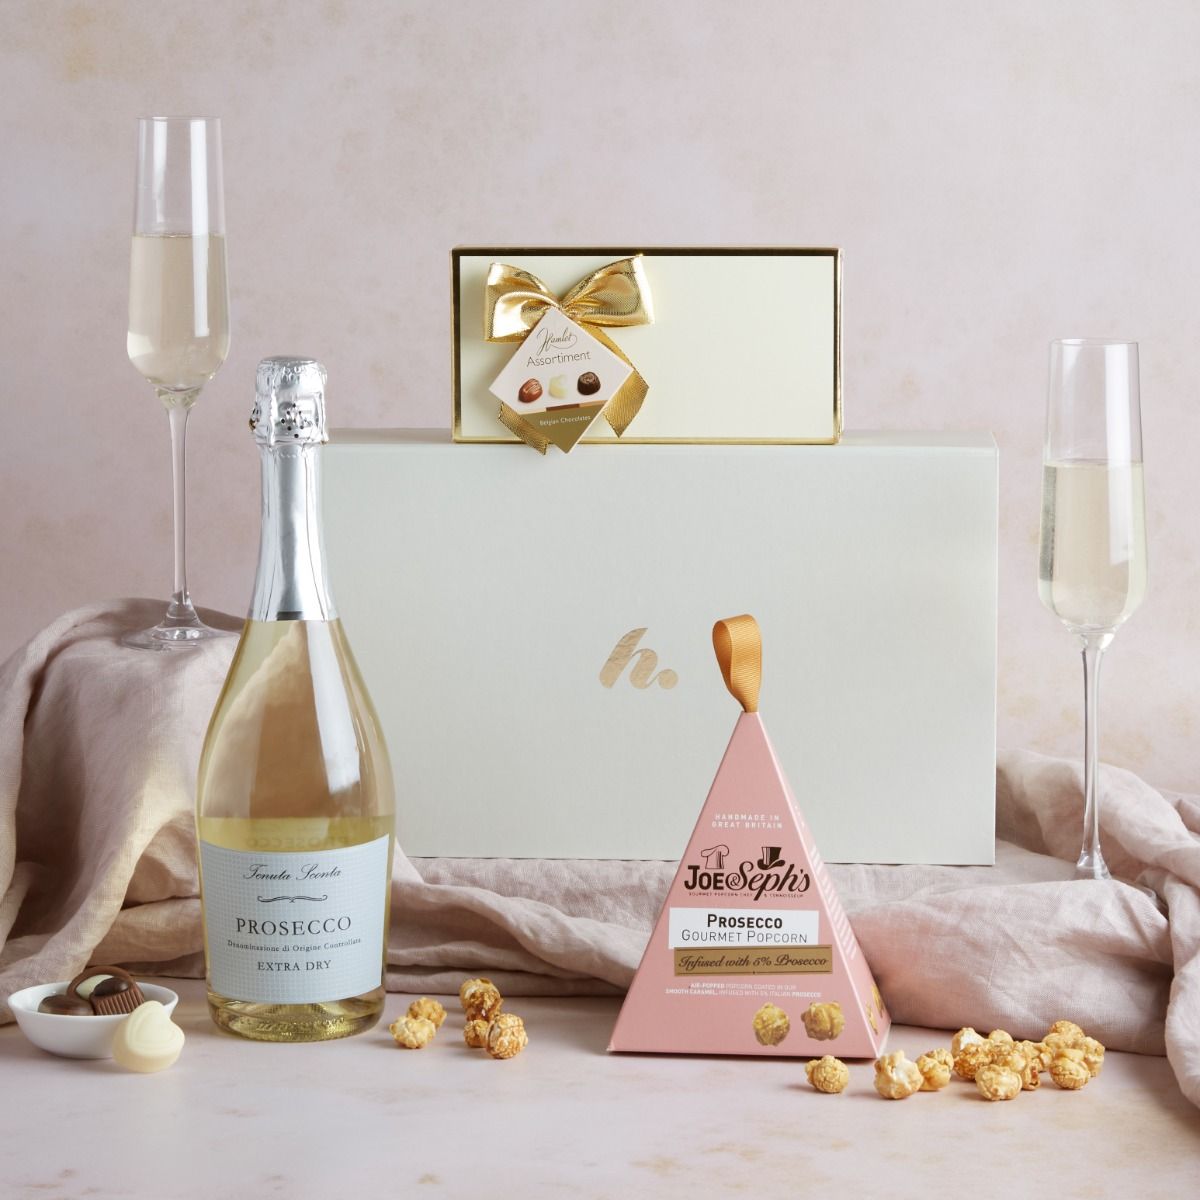 prosecco & treats hamper with contents on display